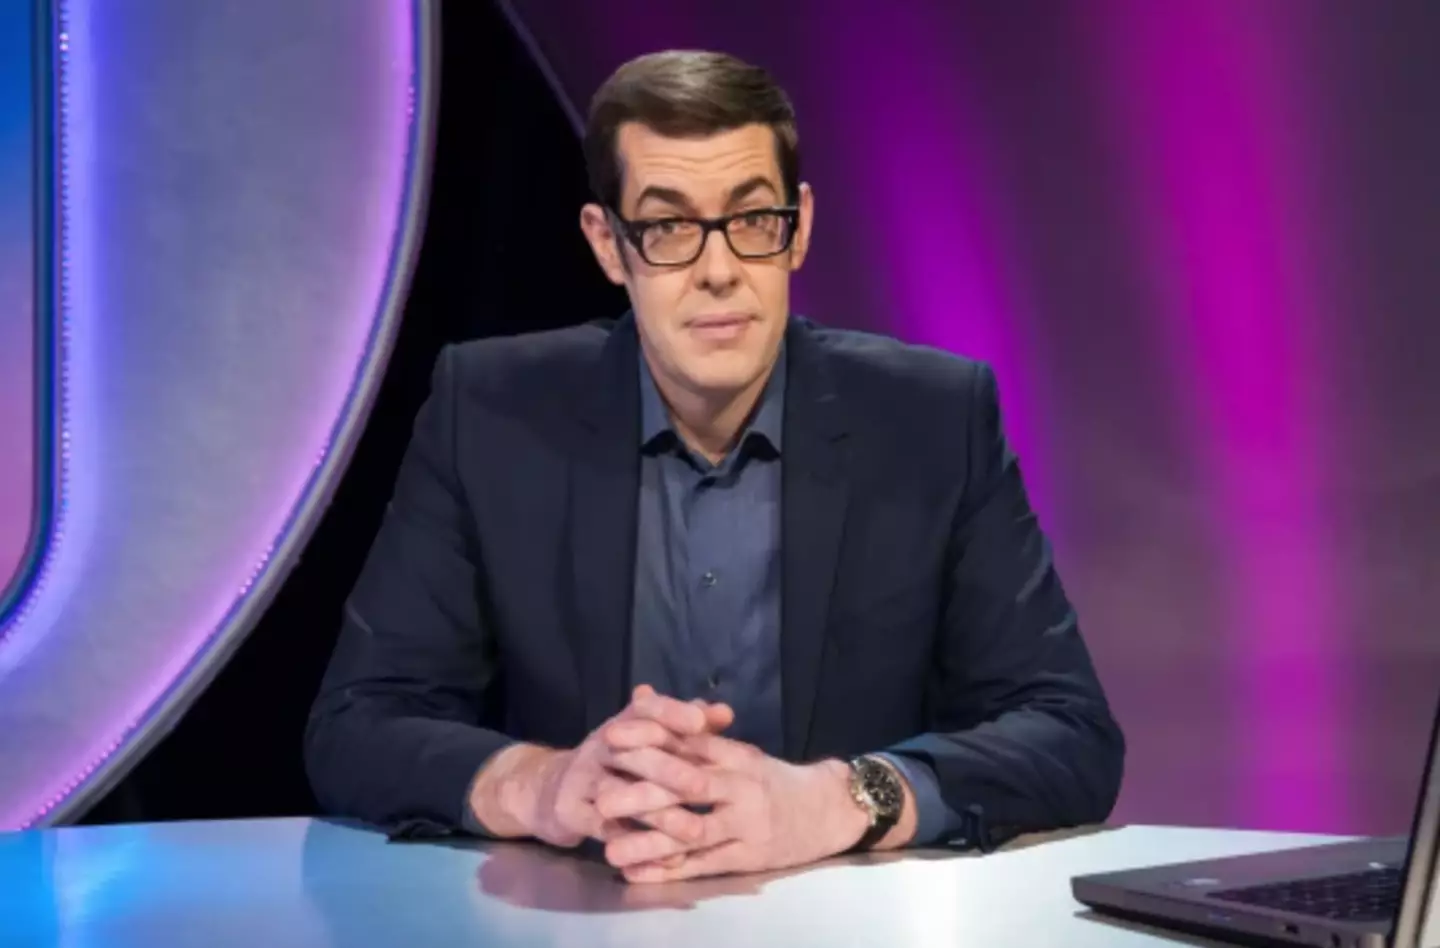 Osman revealed the Queen was 'very competitive' during Pointless.